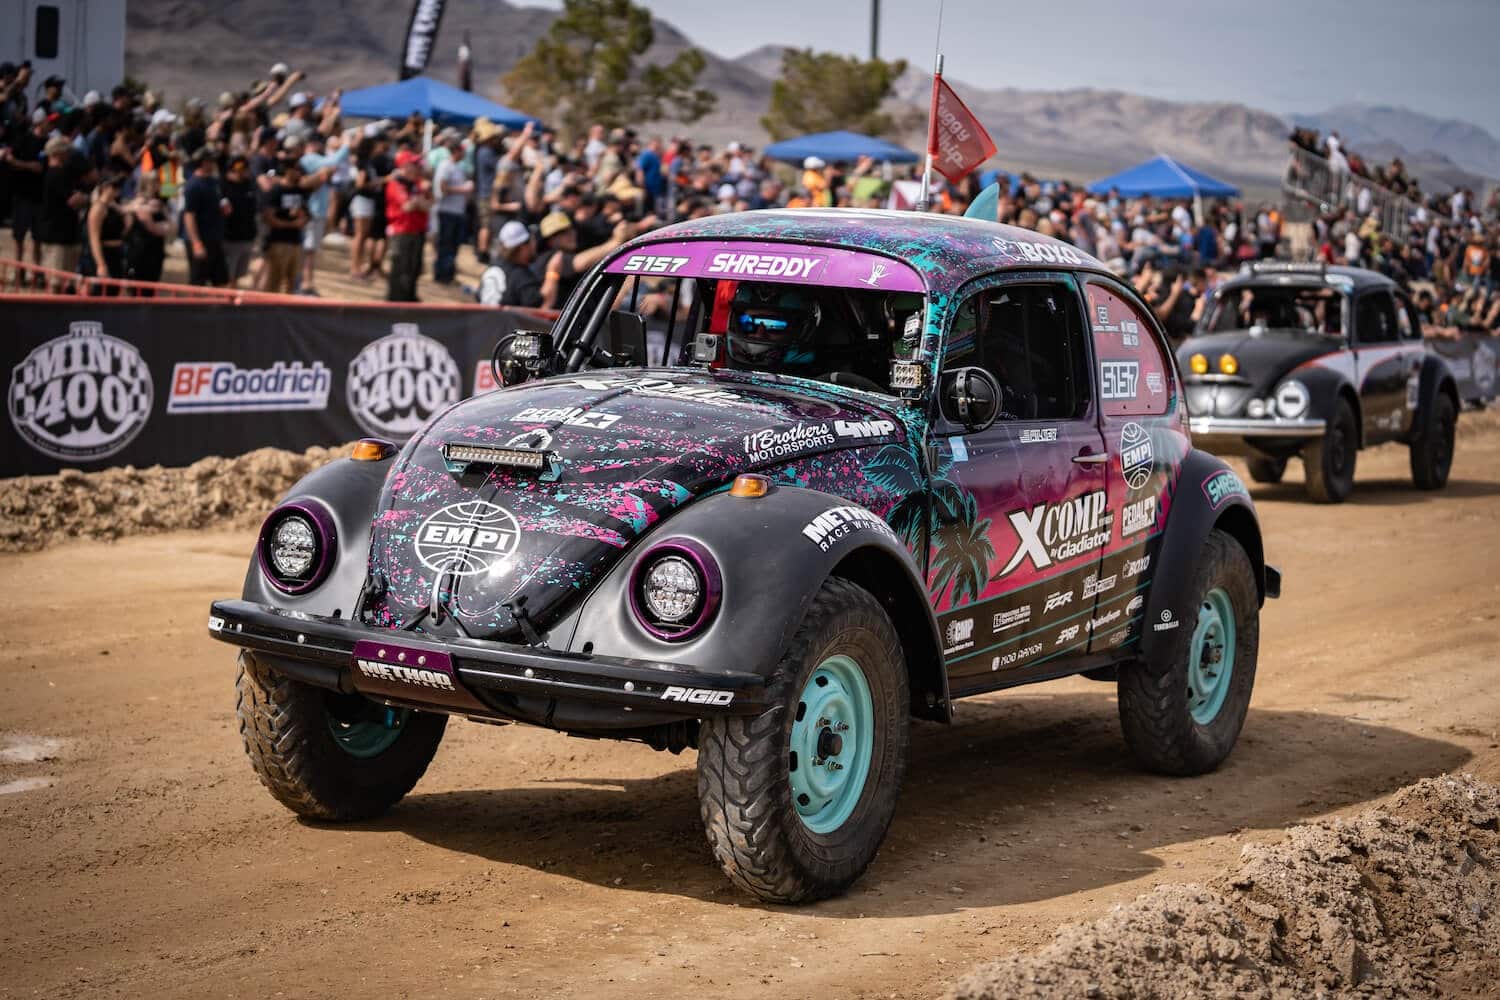 A VW Bettle racing on a dirt track.